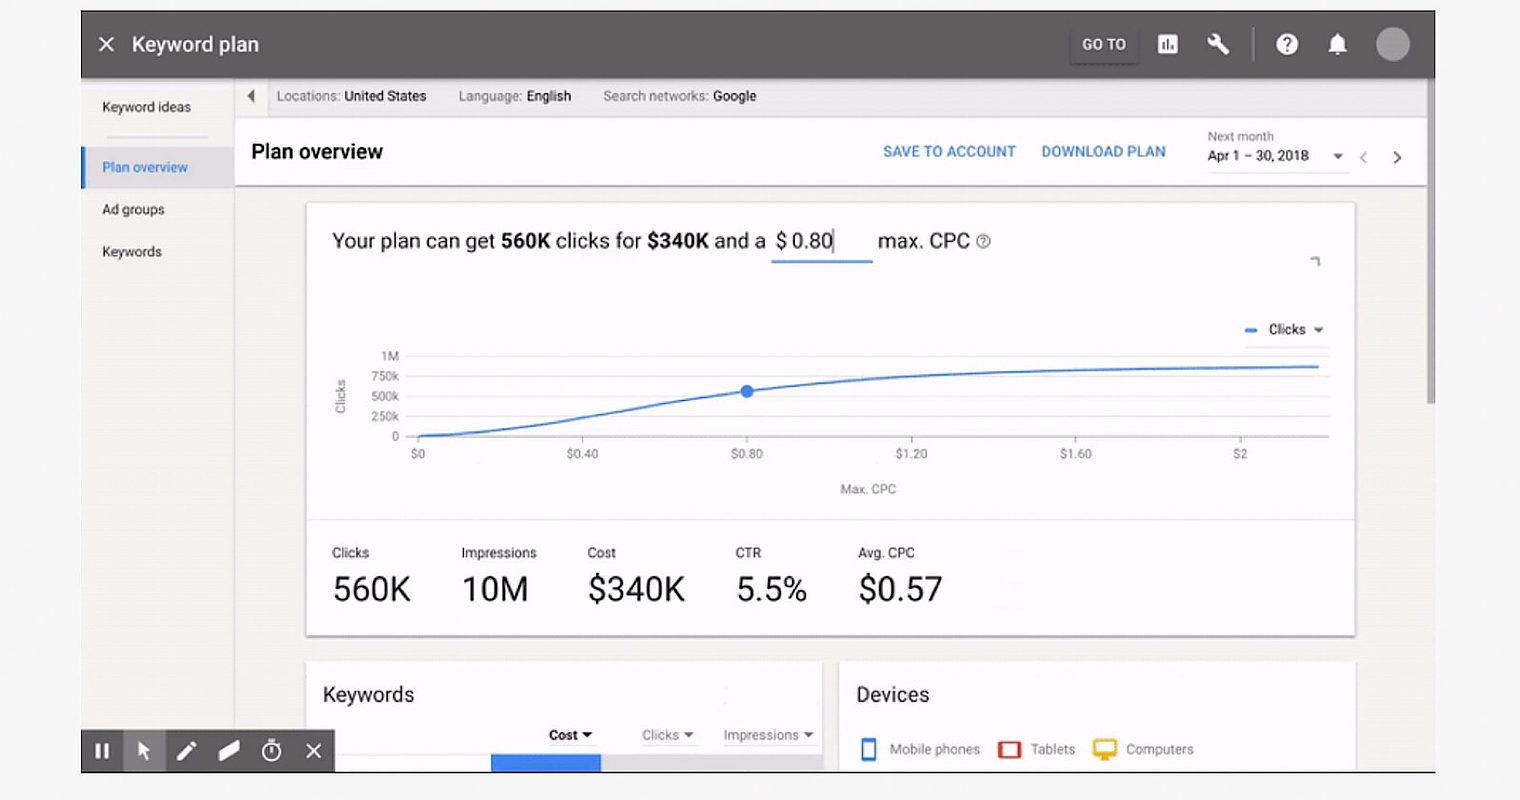 Google AdWords is Fully Switching to New Version by End of Year